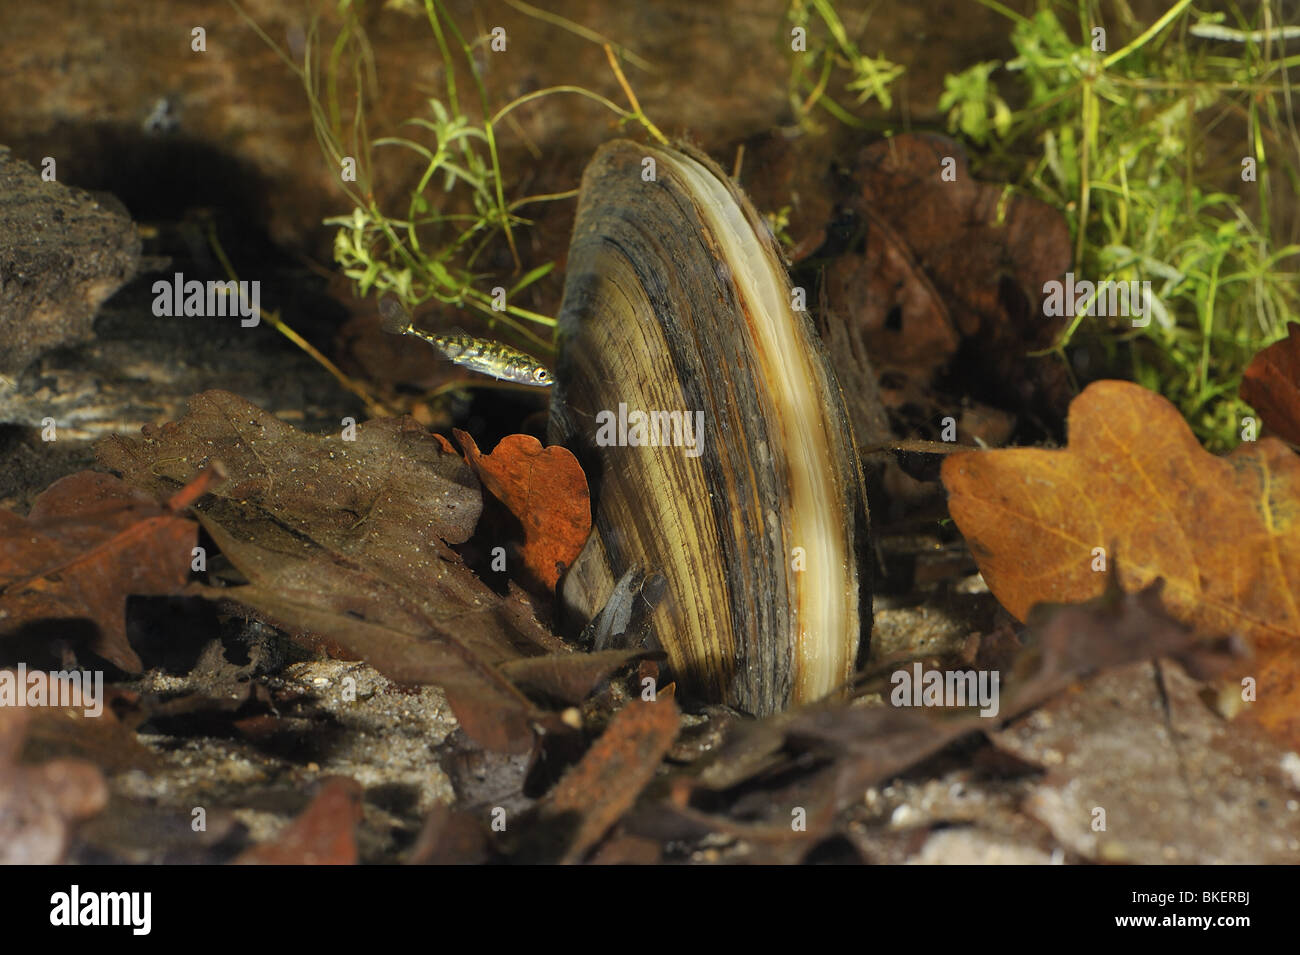 Three-spined stickleback swimming around a swan mussel on the bottom of a pond Stock Photo